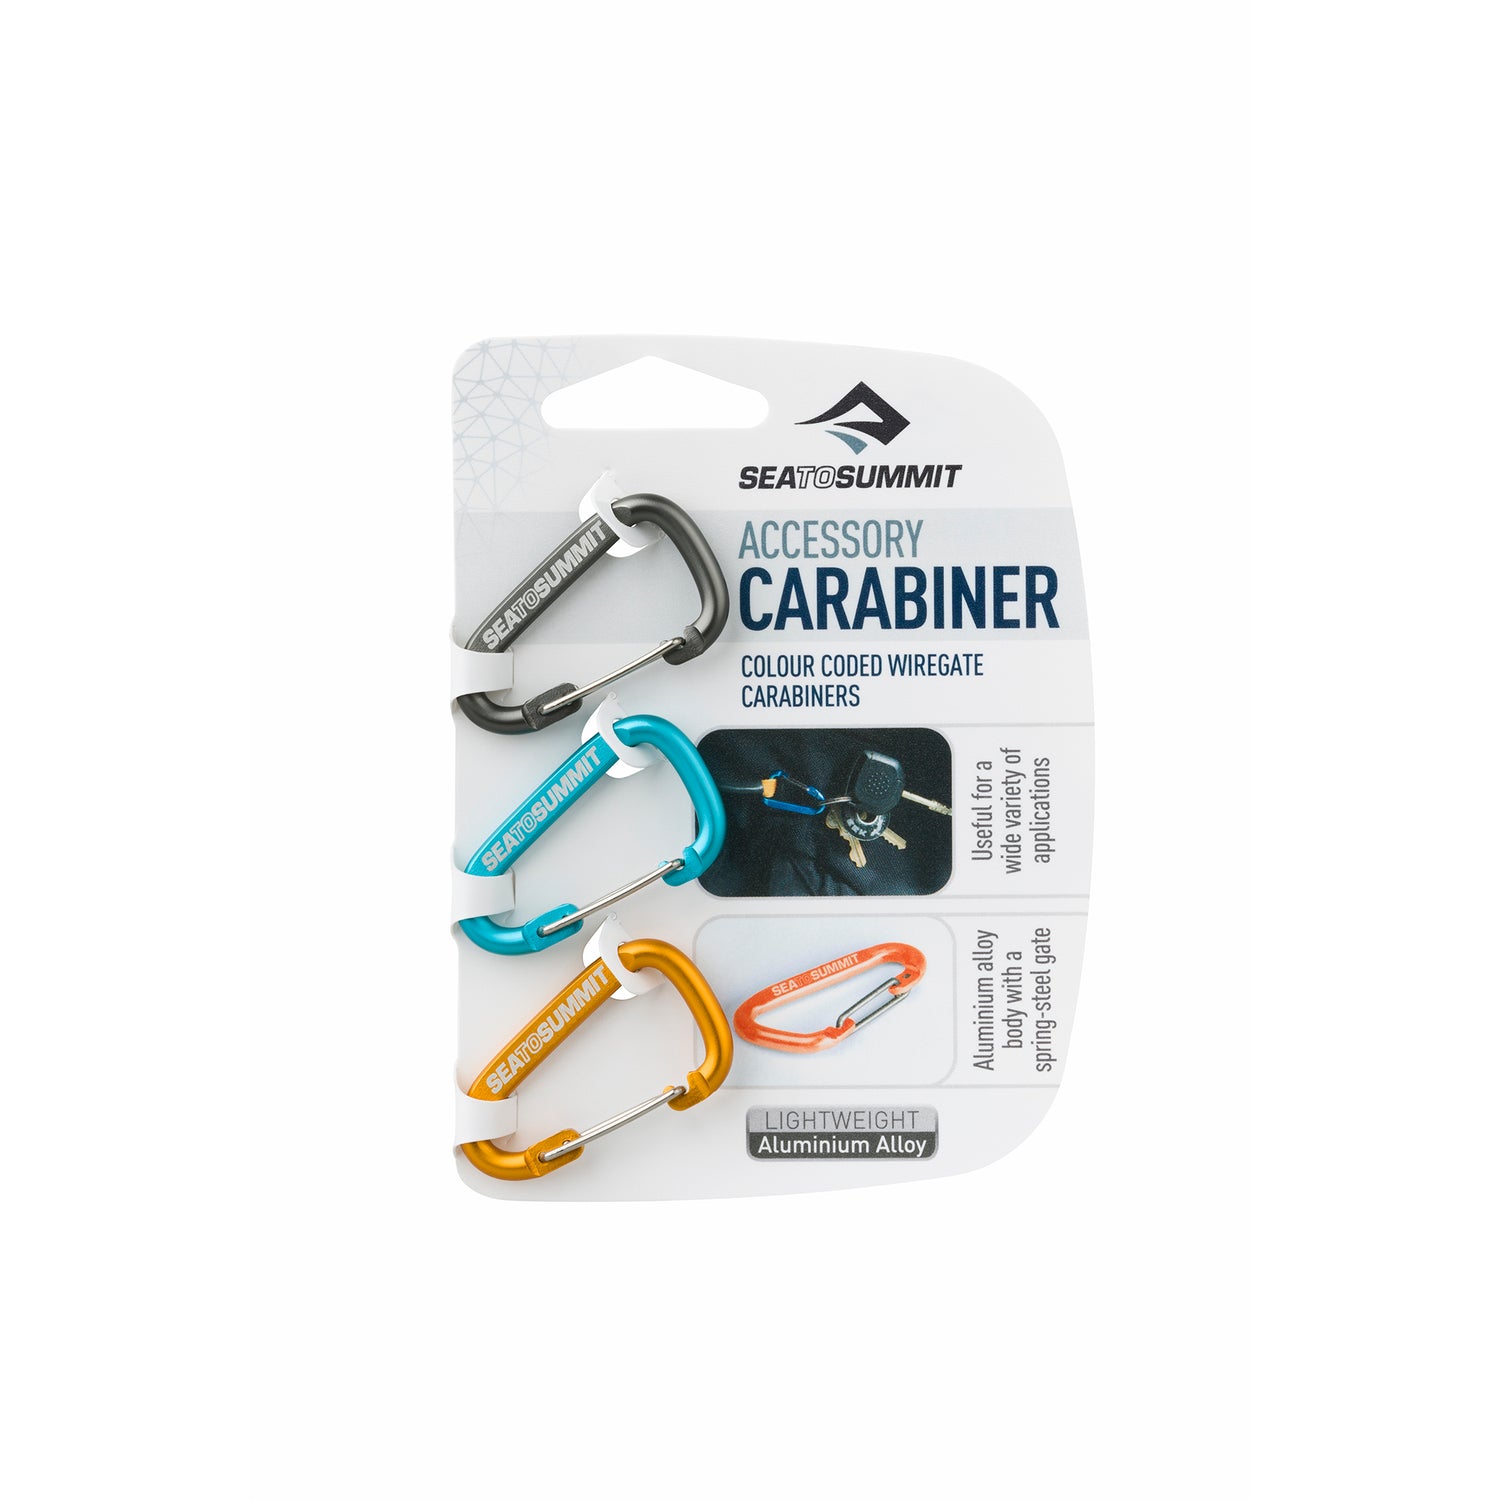 Carabiners that come in a pack of 3